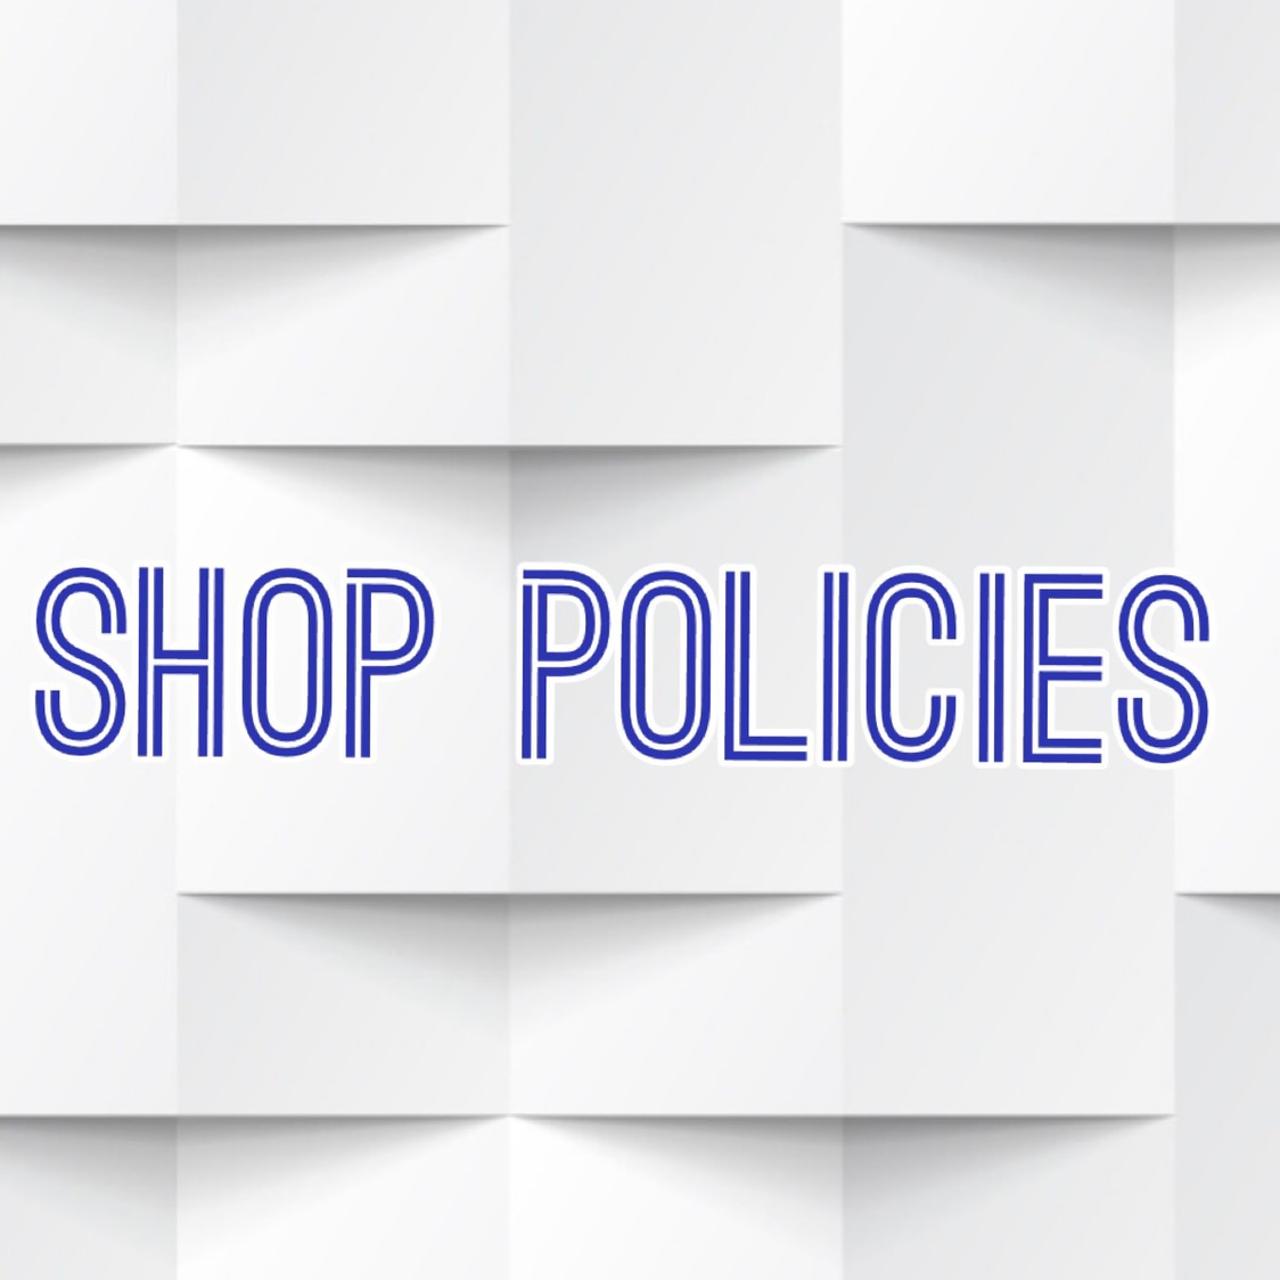 Product Image 1 - Here are my store policies.